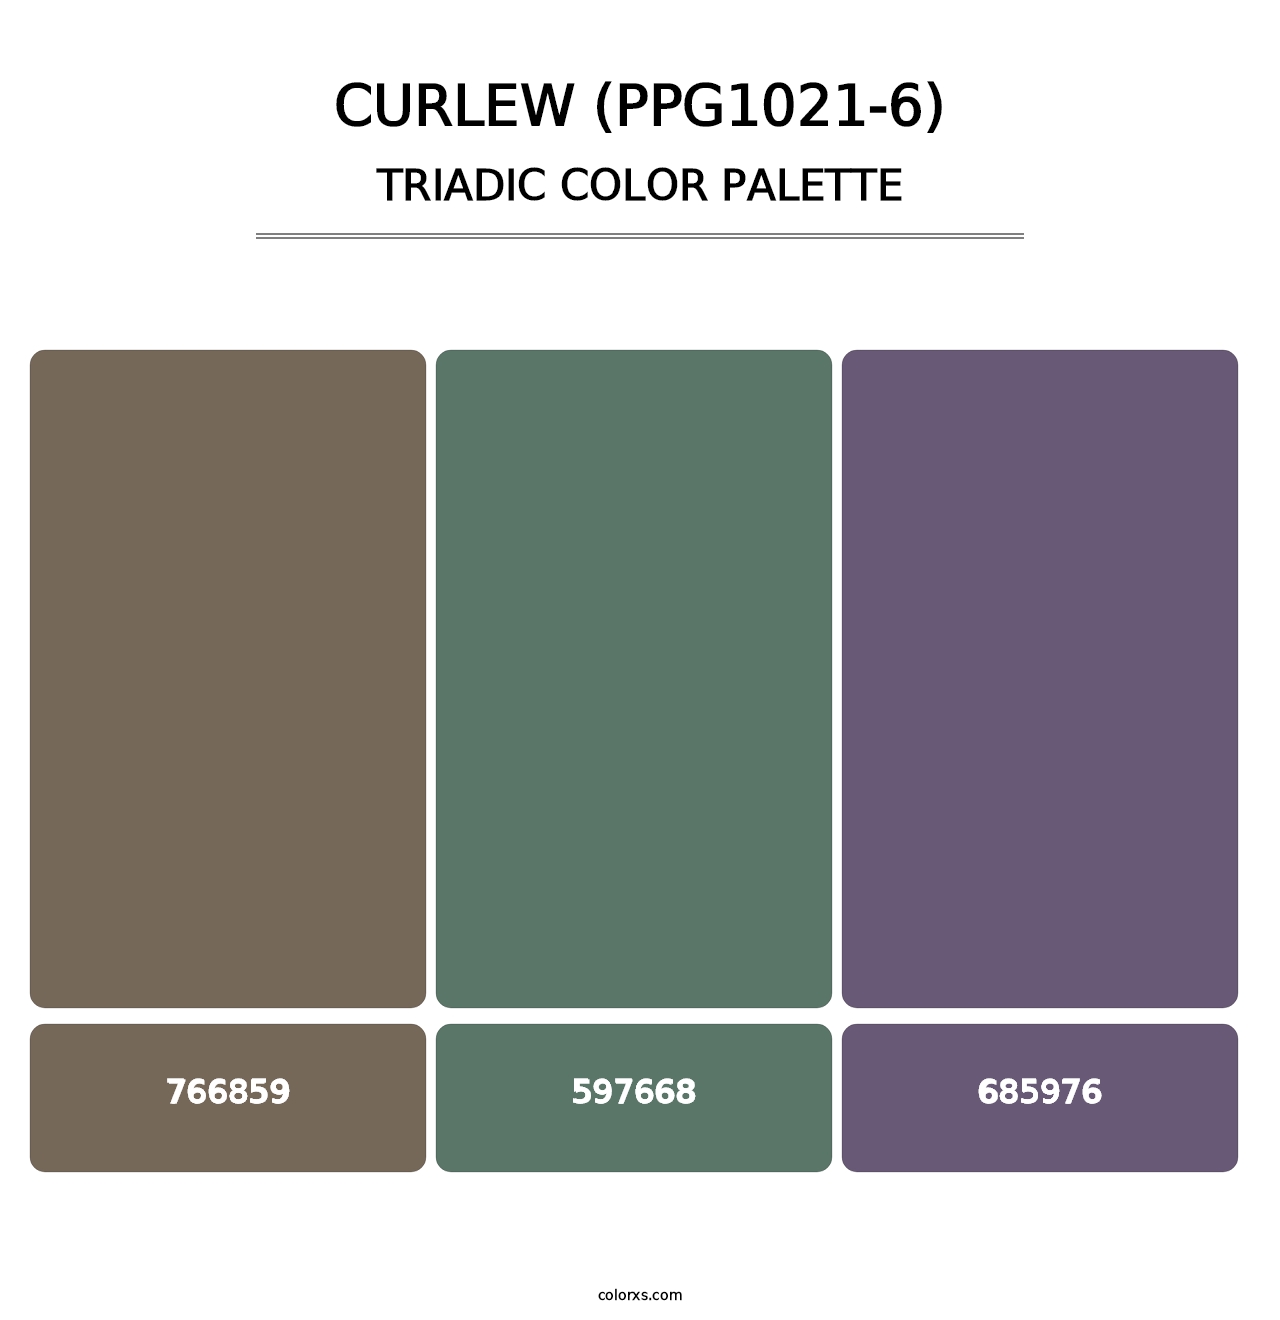 Curlew (PPG1021-6) - Triadic Color Palette